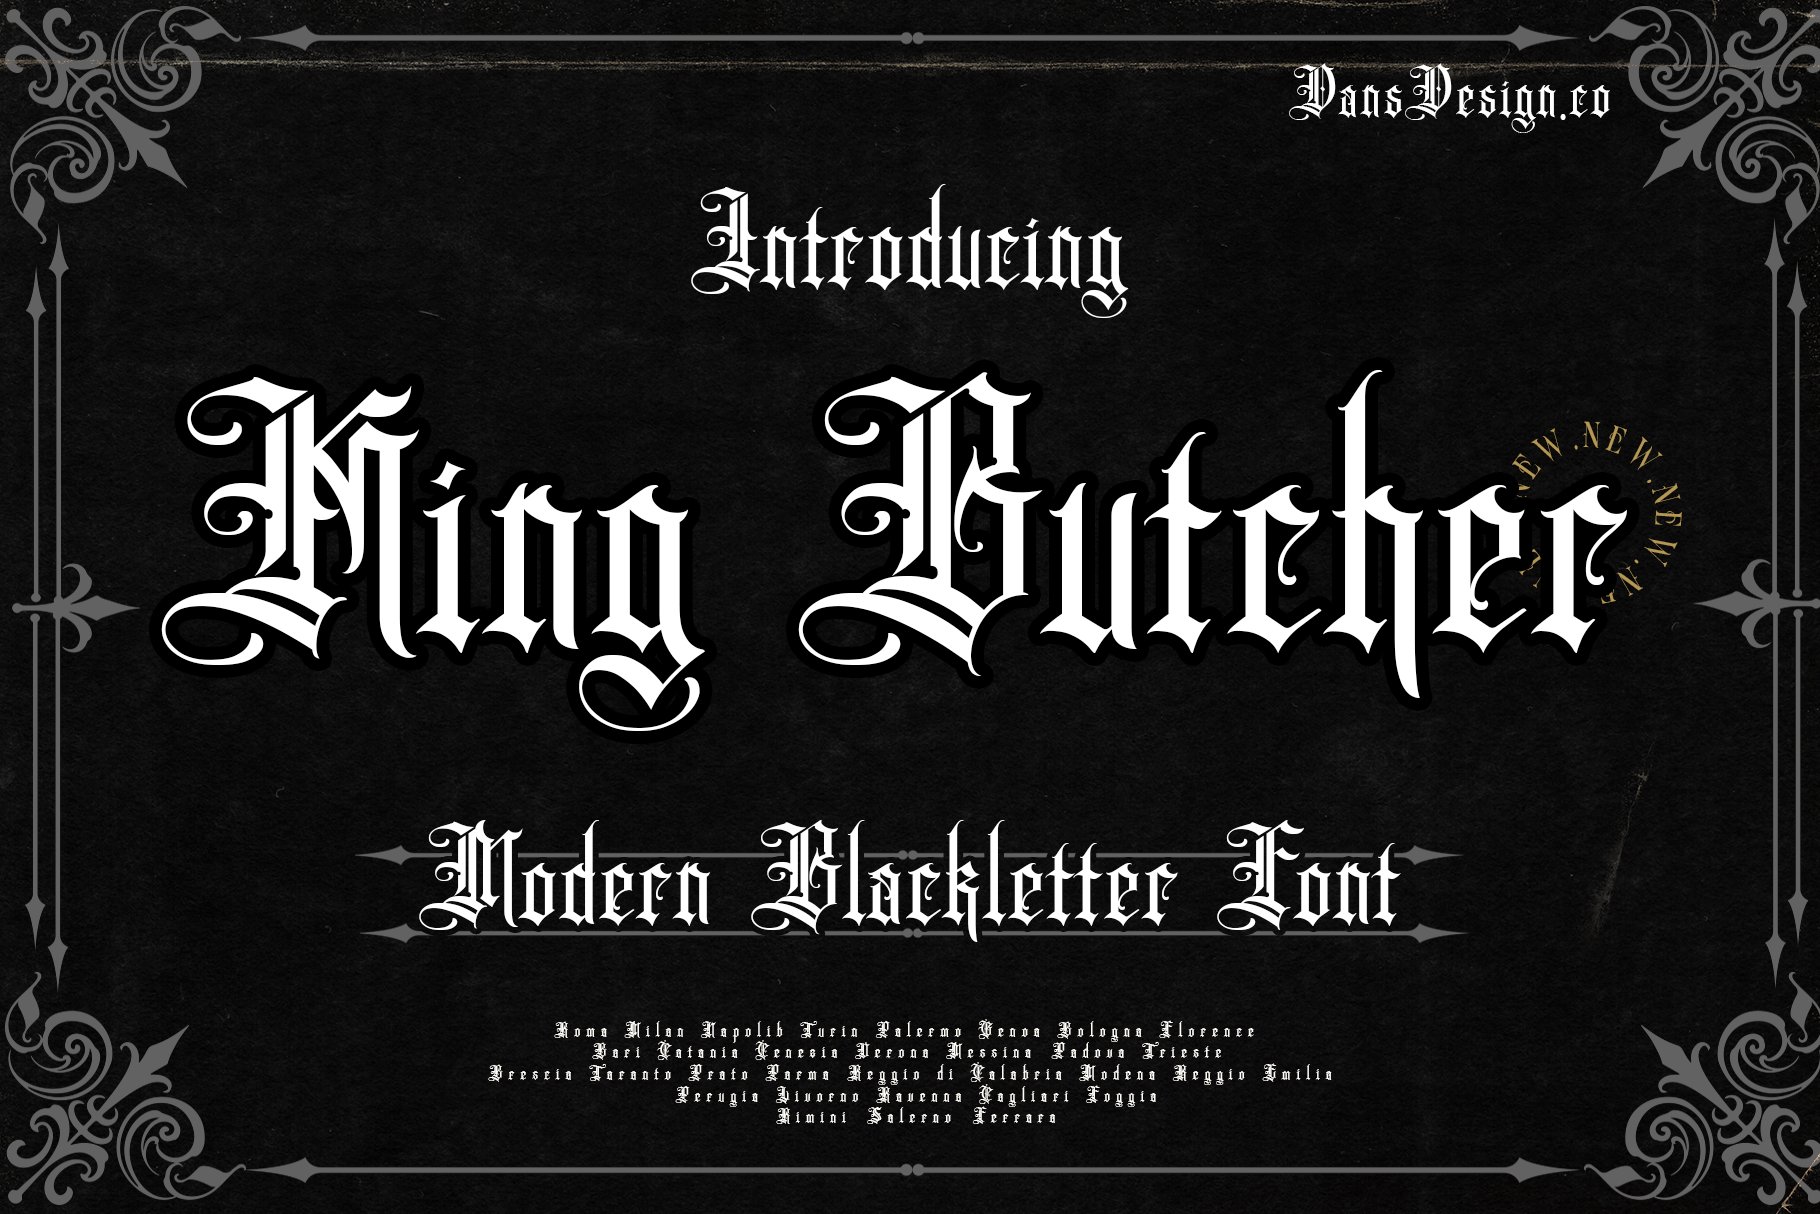 King Butcher cover image.